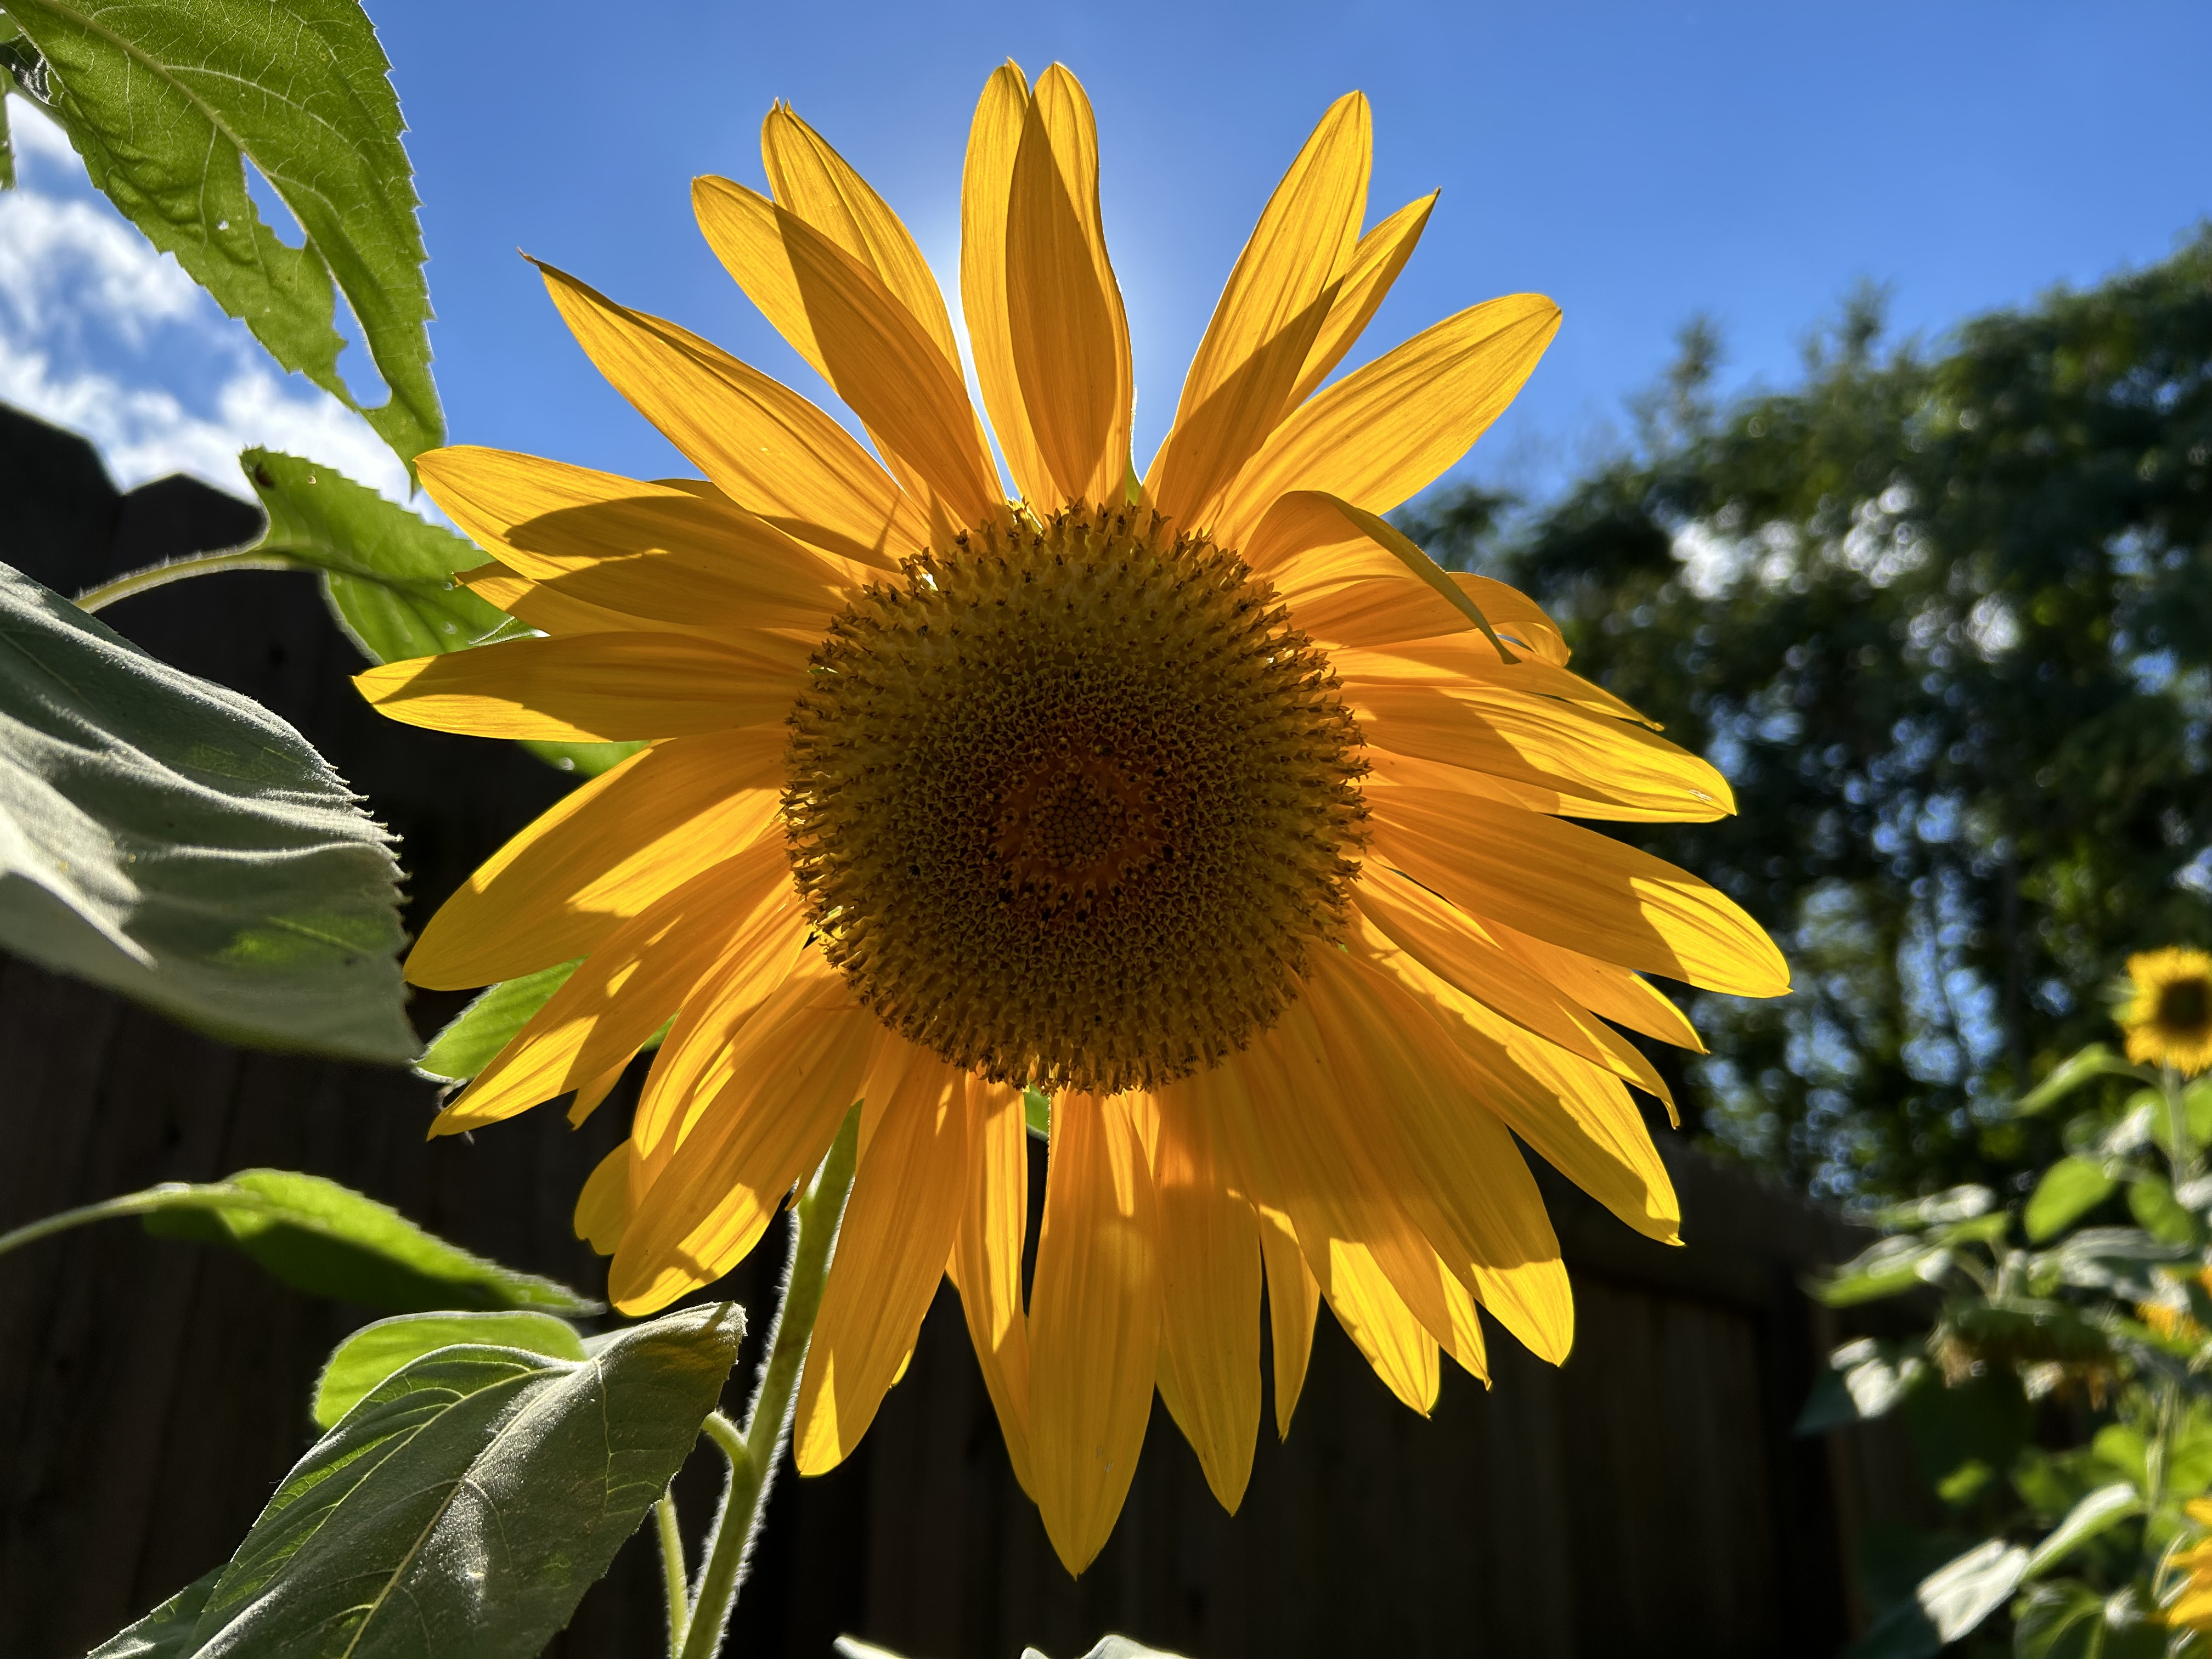 A photo of a sunflower, taken with the iPhone 14.